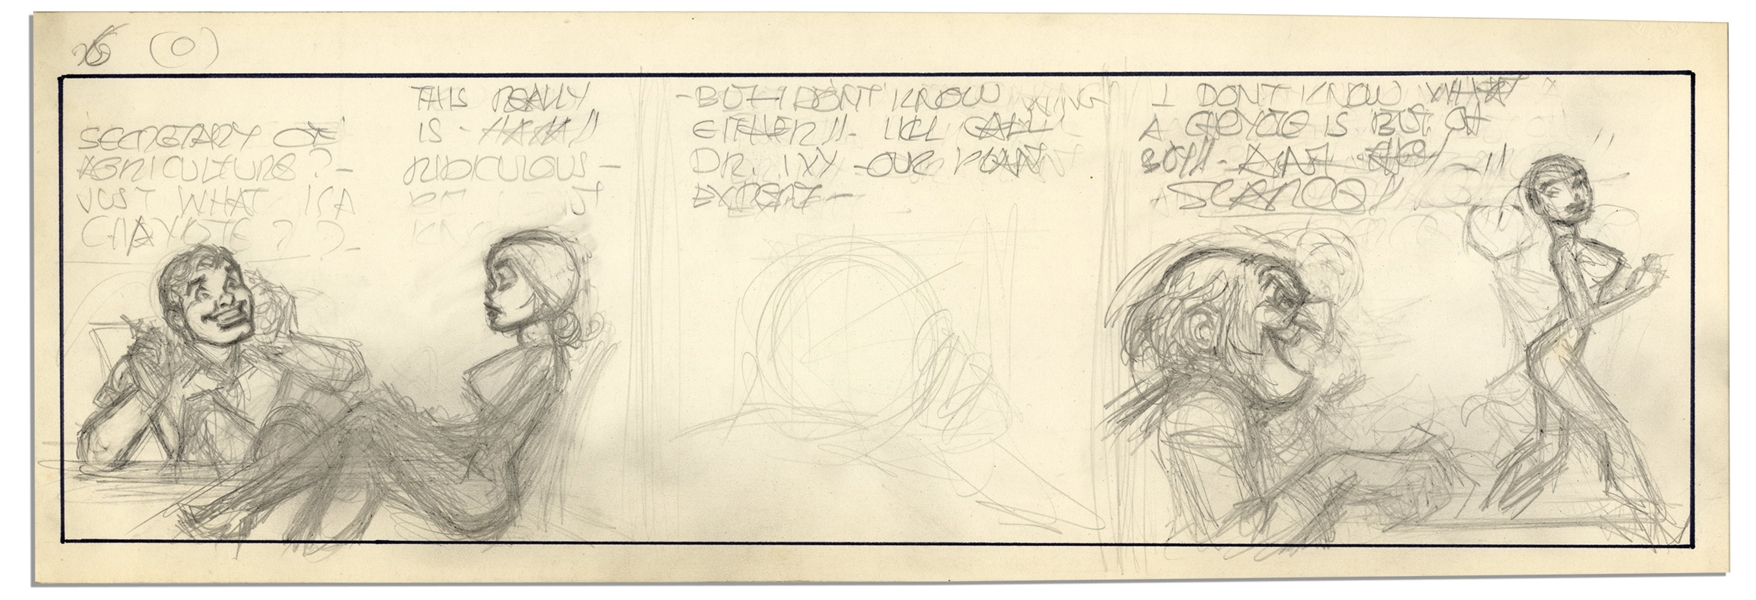 Unfinished Comic Strip by Al Capp, Drawn in Pencil -- Undated & Untitled, Most Likely a ''Li'l Abner'' Strip -- 18.5'' x 6.5'' -- Very Good -- From the Al Capp Estate